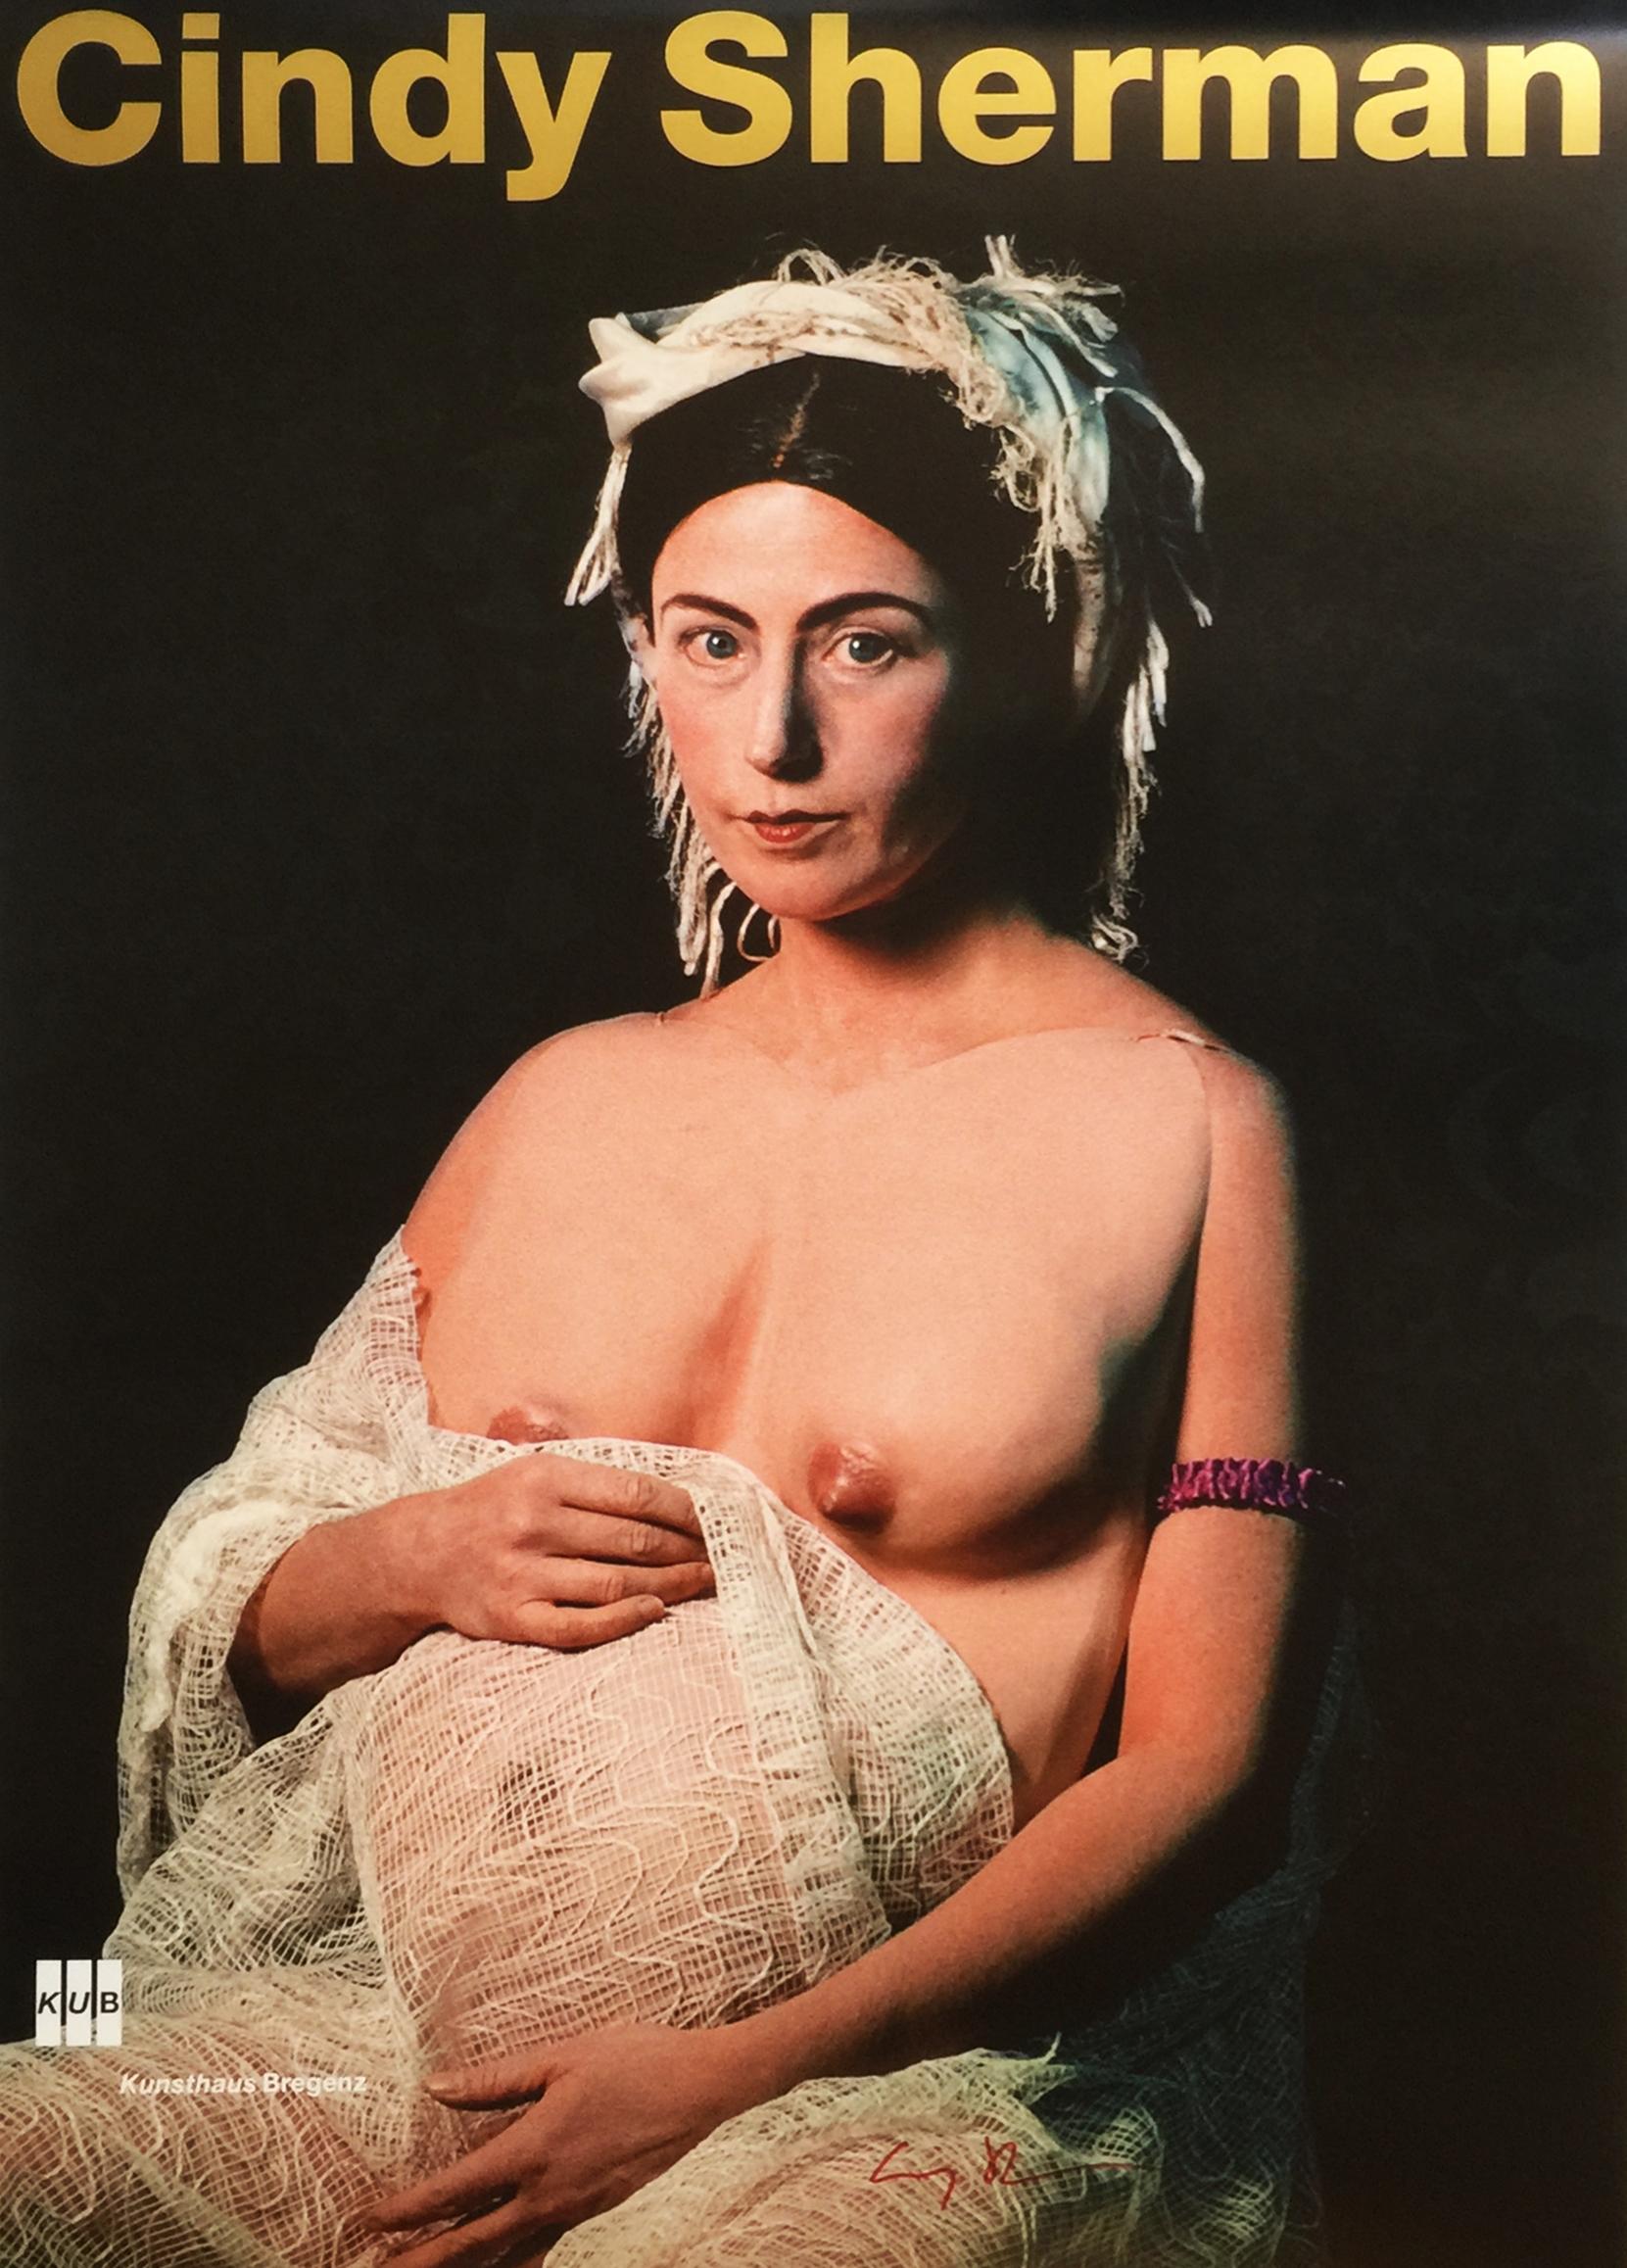 Cindy Sherman at Kunsthaus Bregen (Limited Edition hand signed by Cindy Sherman)